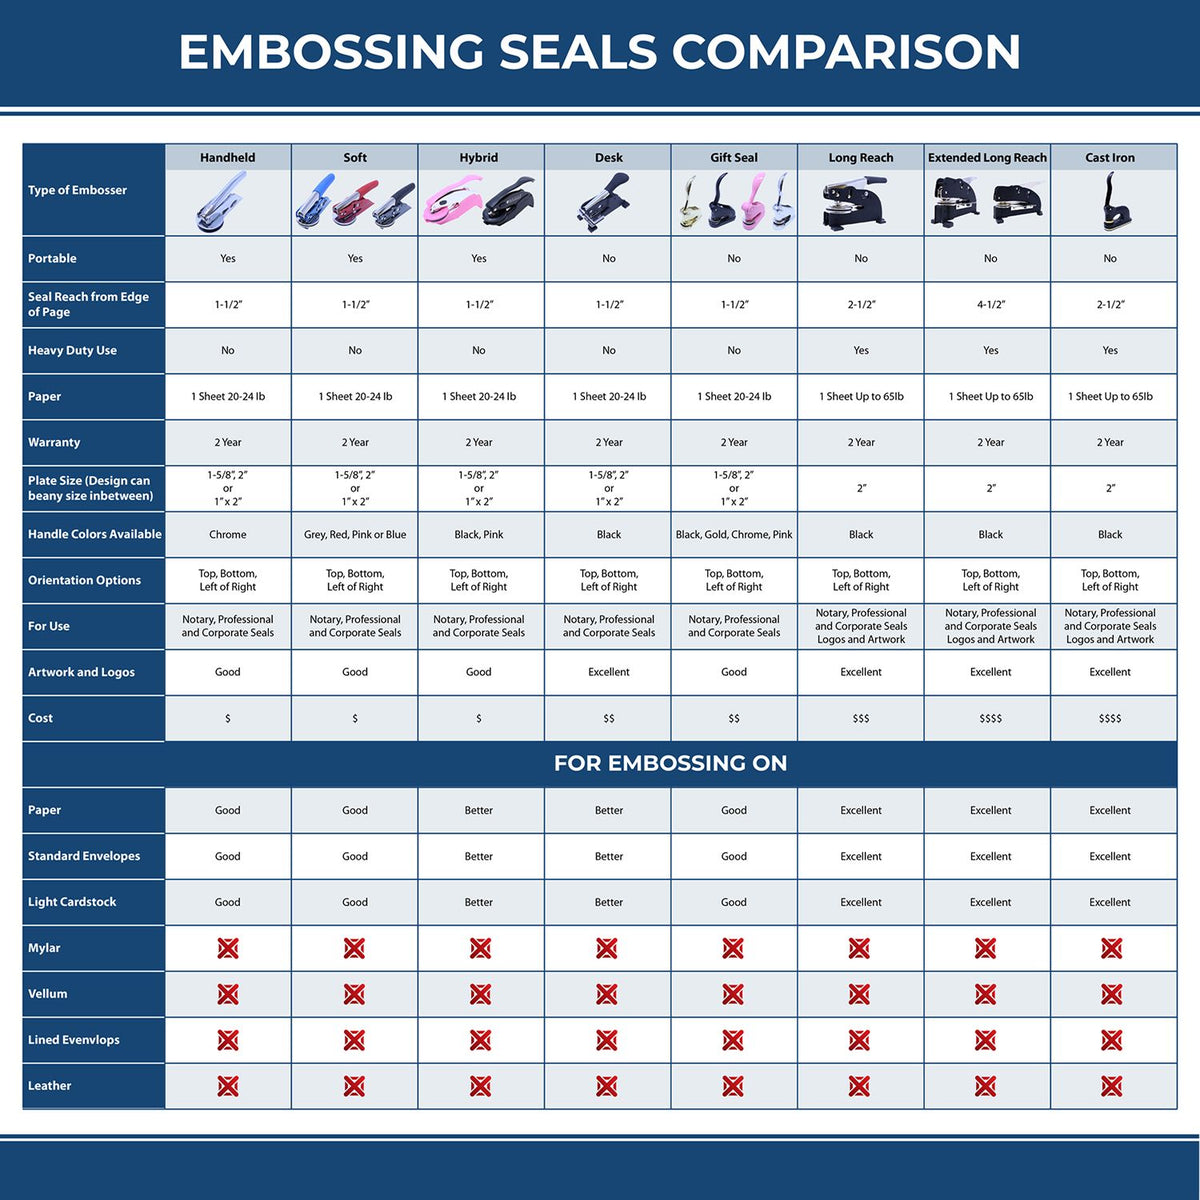 A comparison chart for the different types of mount models available for the Handheld Mississippi Professional Engineer Embosser.